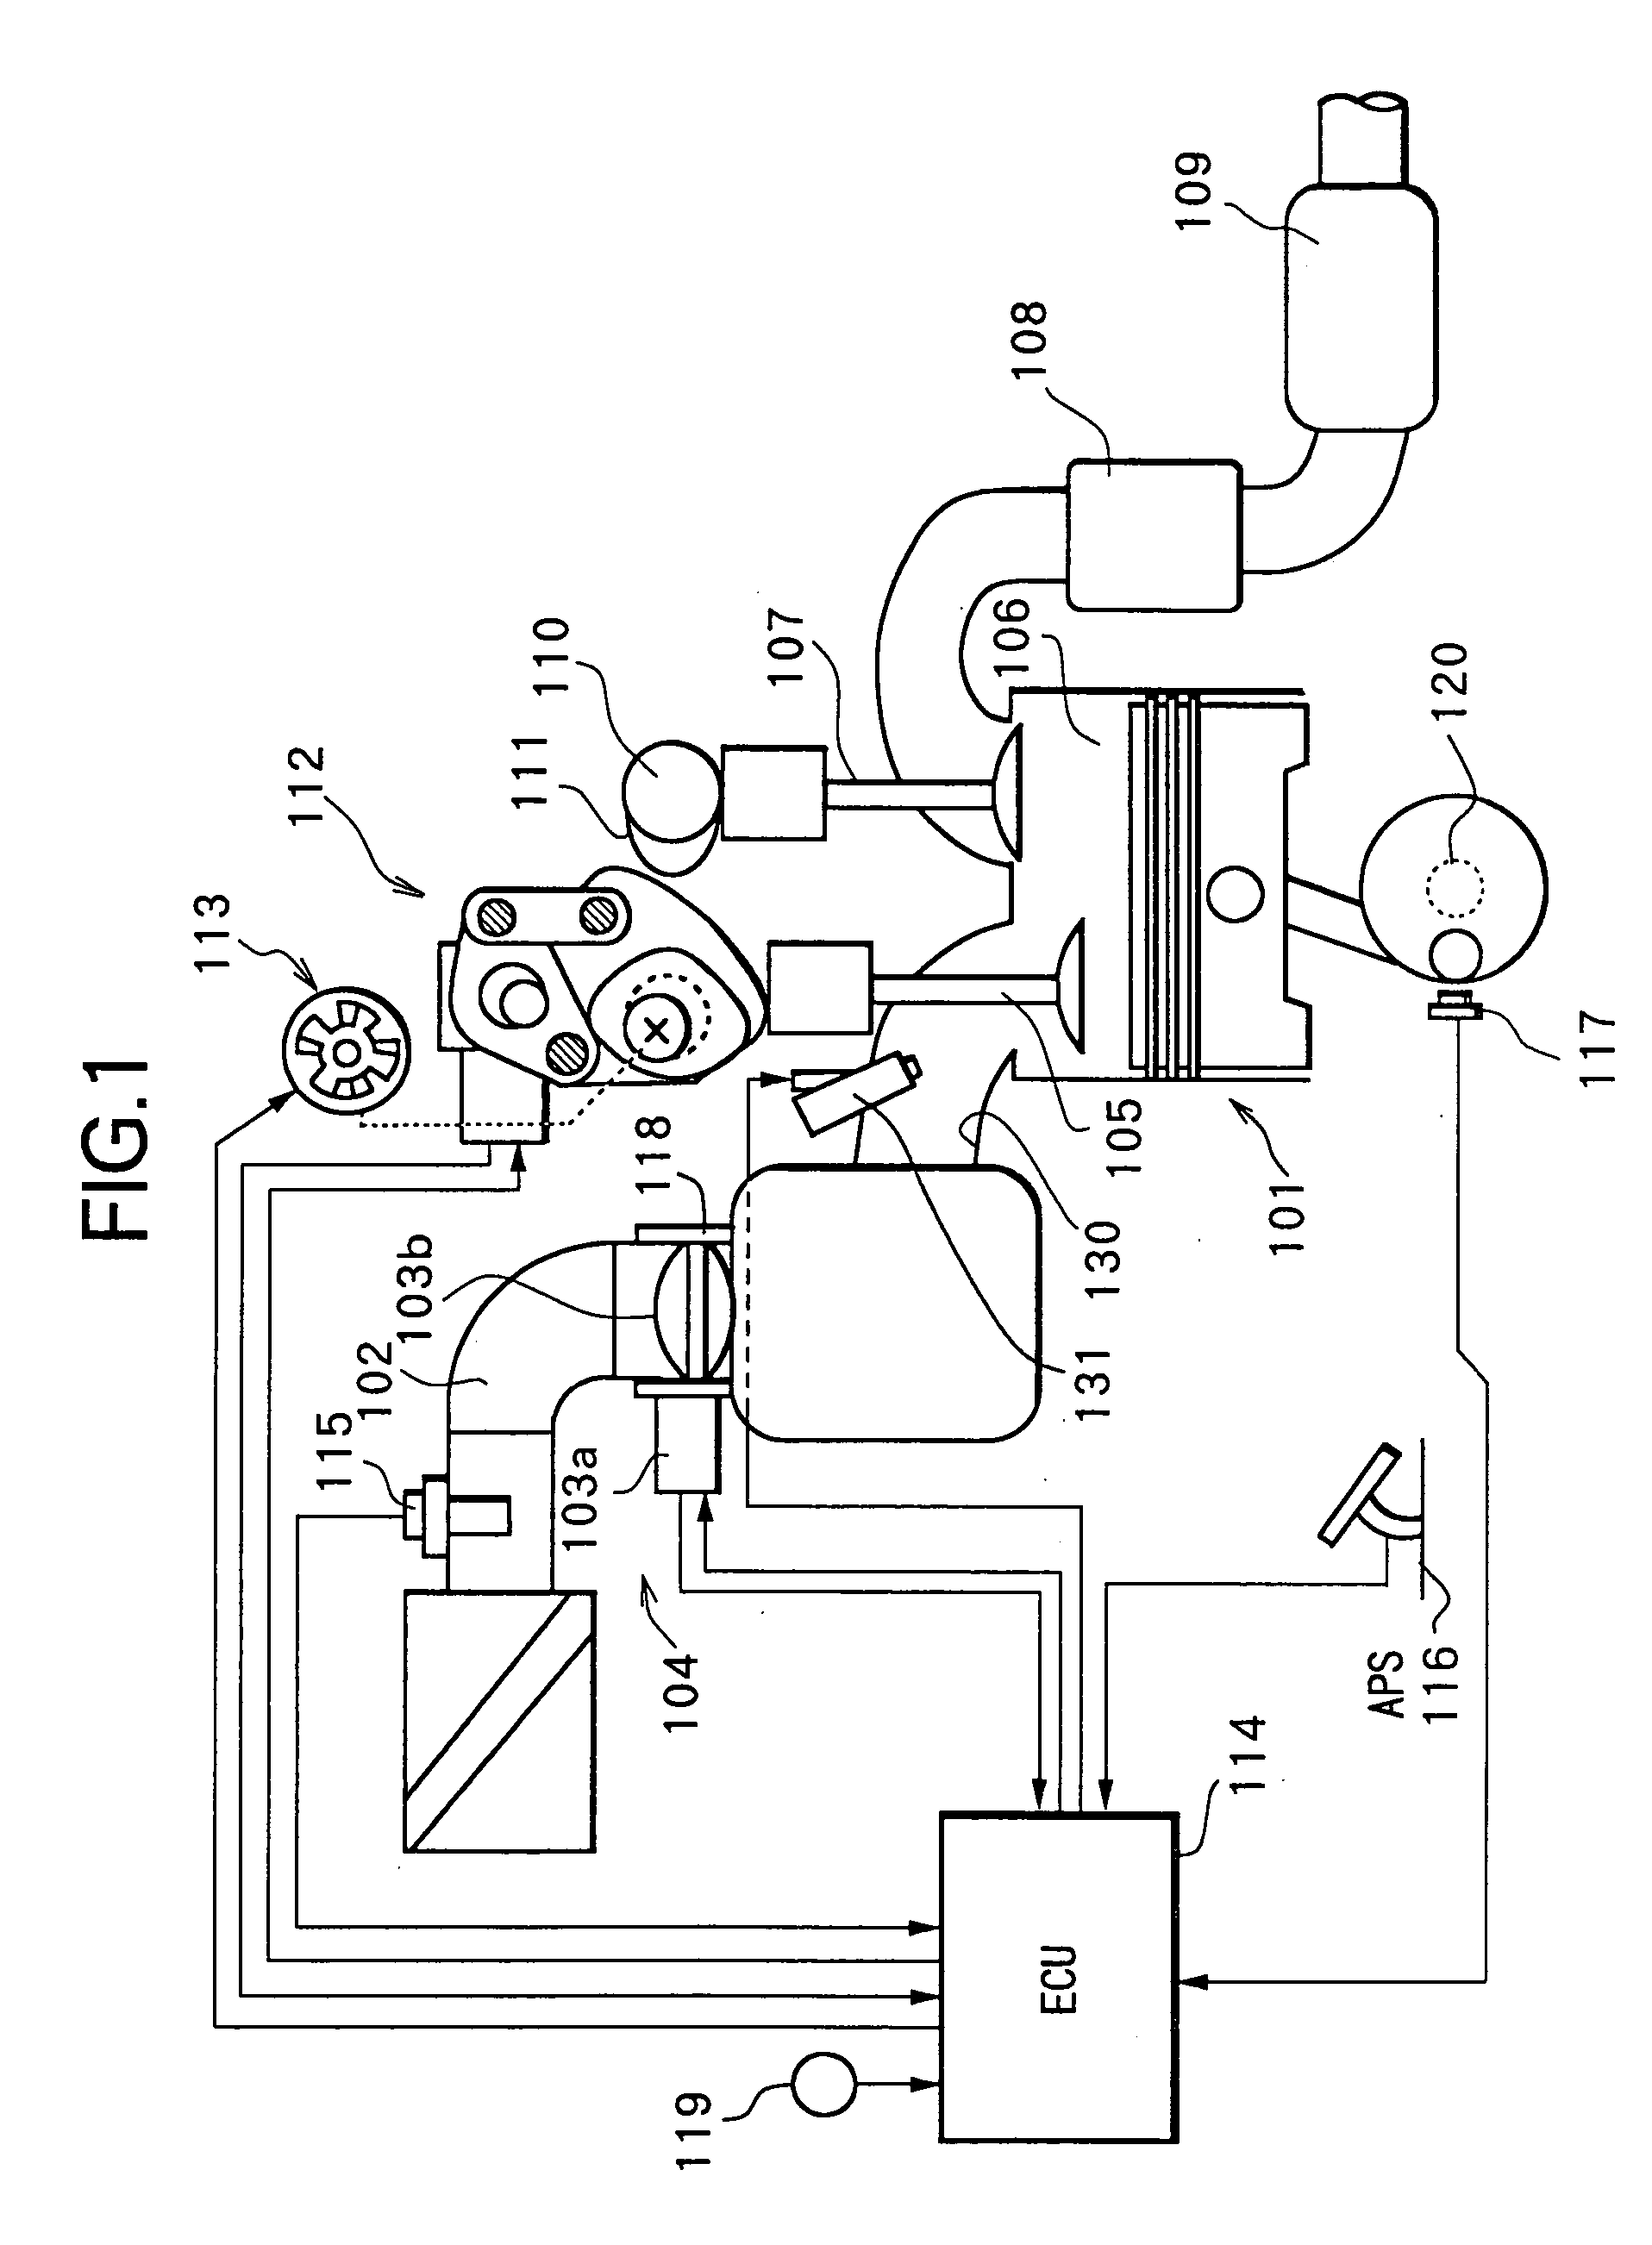 Apparatus for controlling fuel injection of engine and method thereof